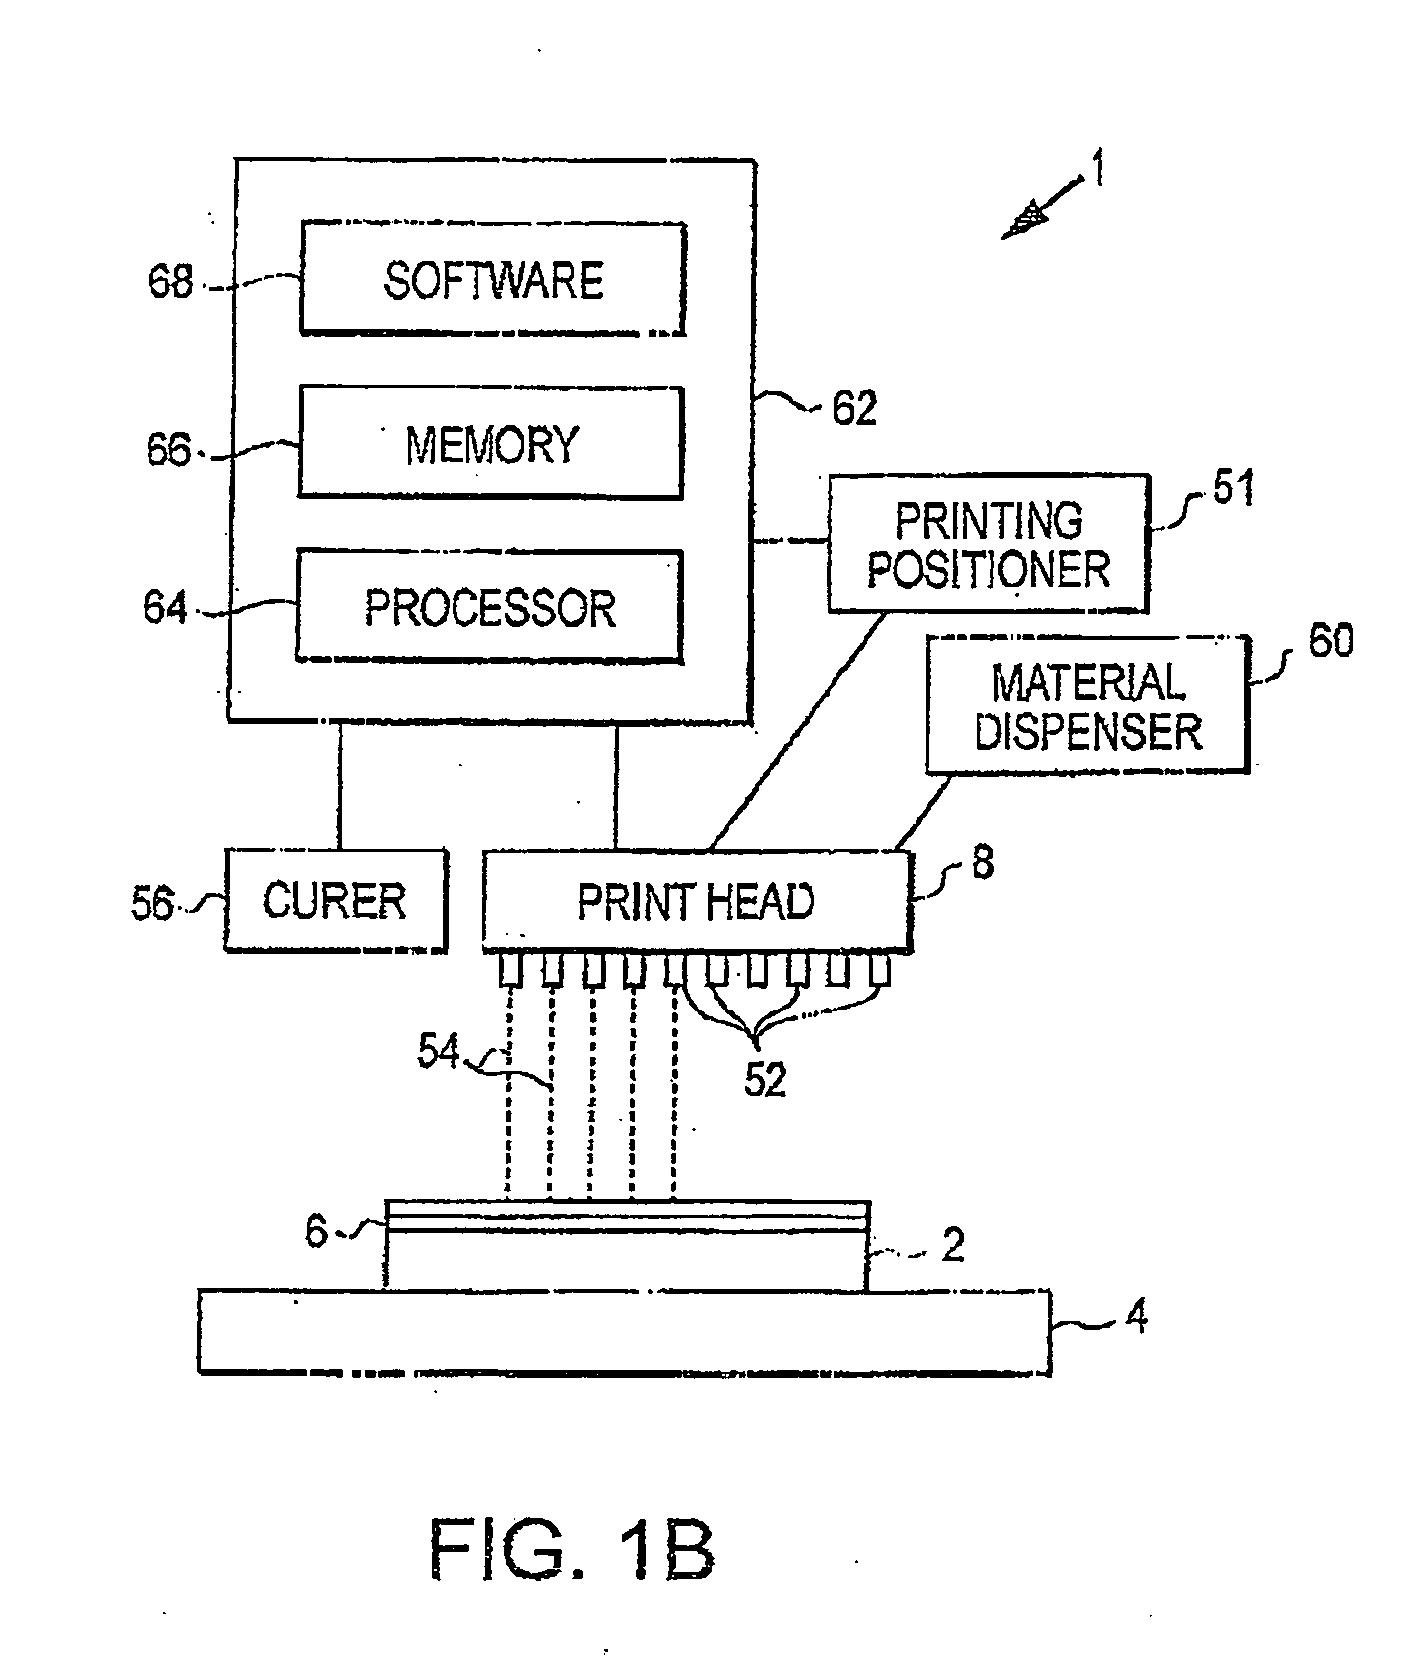 Device, system and method for accurate printing of three dimensional objects